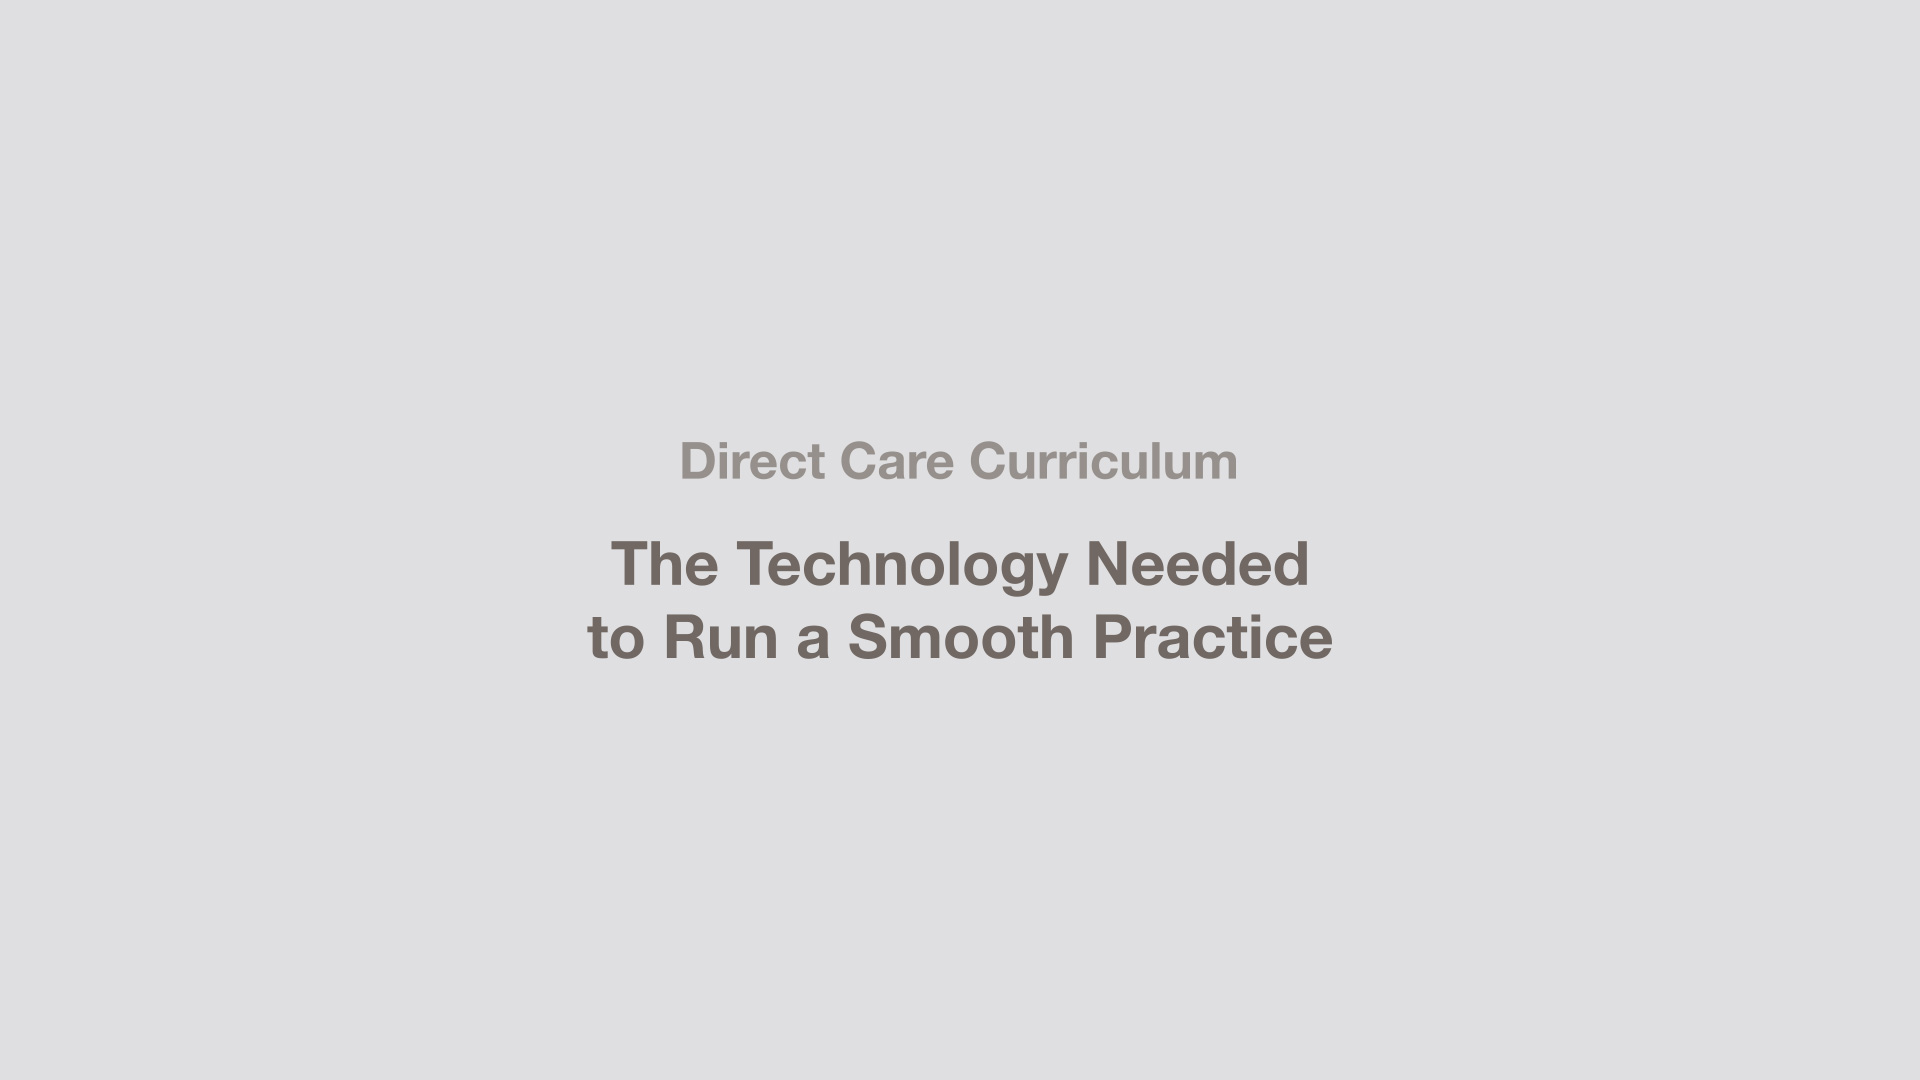 The Technology Needed to Run a Smooth Practice